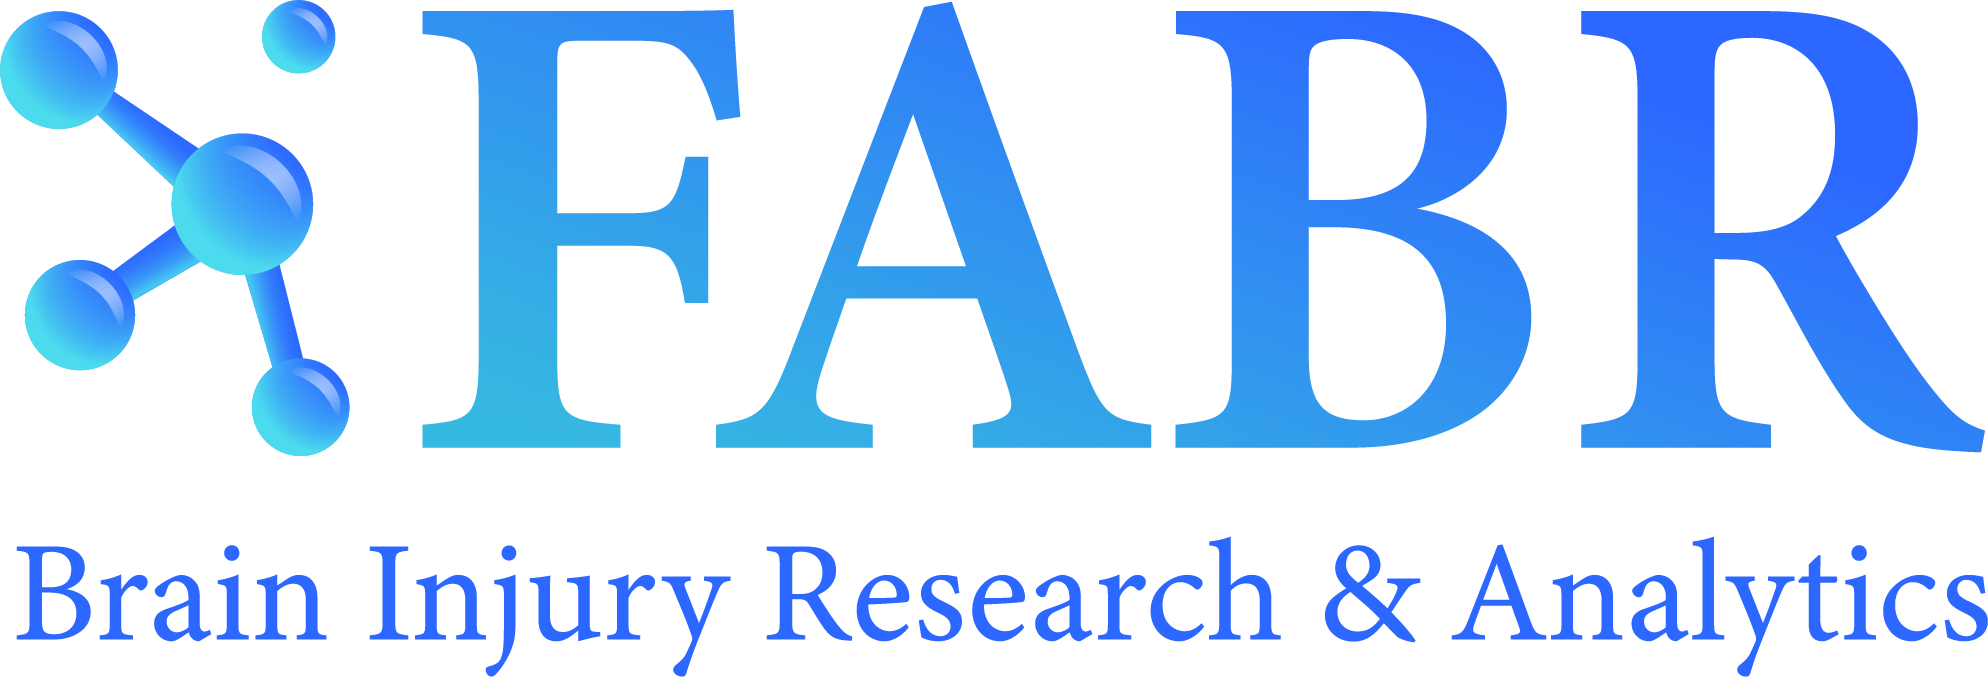 FABR Brain Injury Research and Analytics